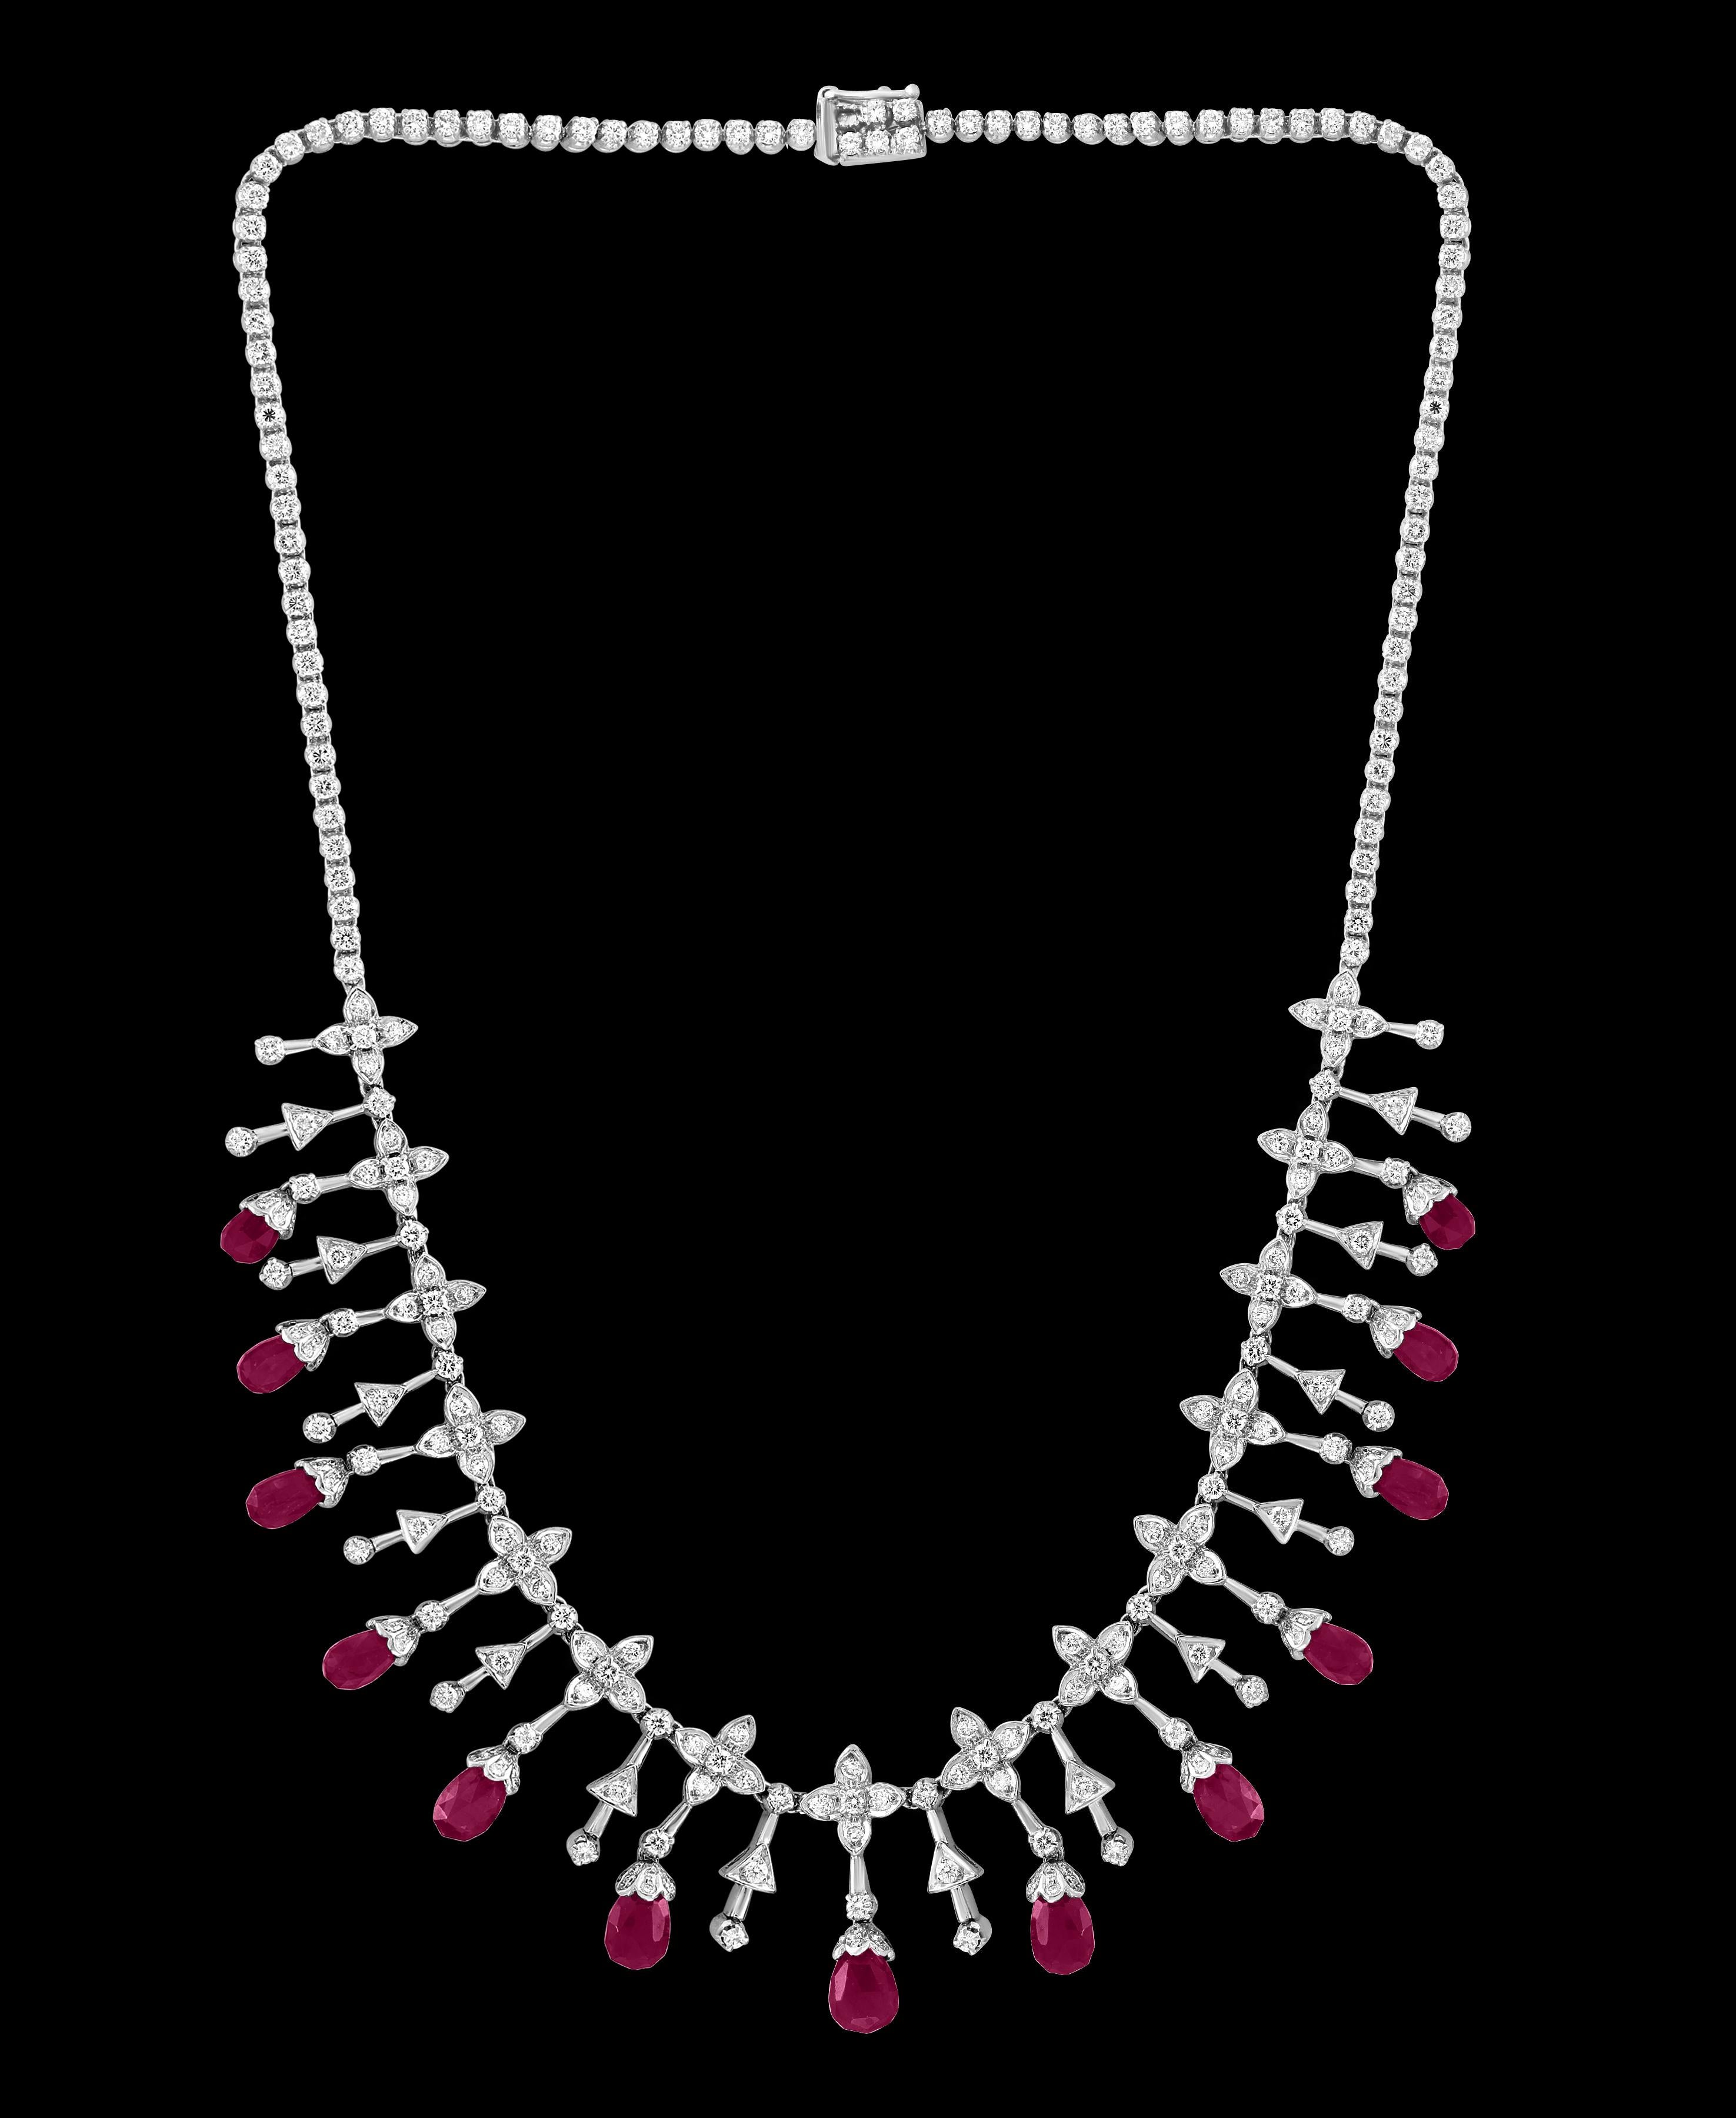 Oval Cut Natural Ruby Briolettes and Diamond Necklace 18 Karat White Gold, Estate